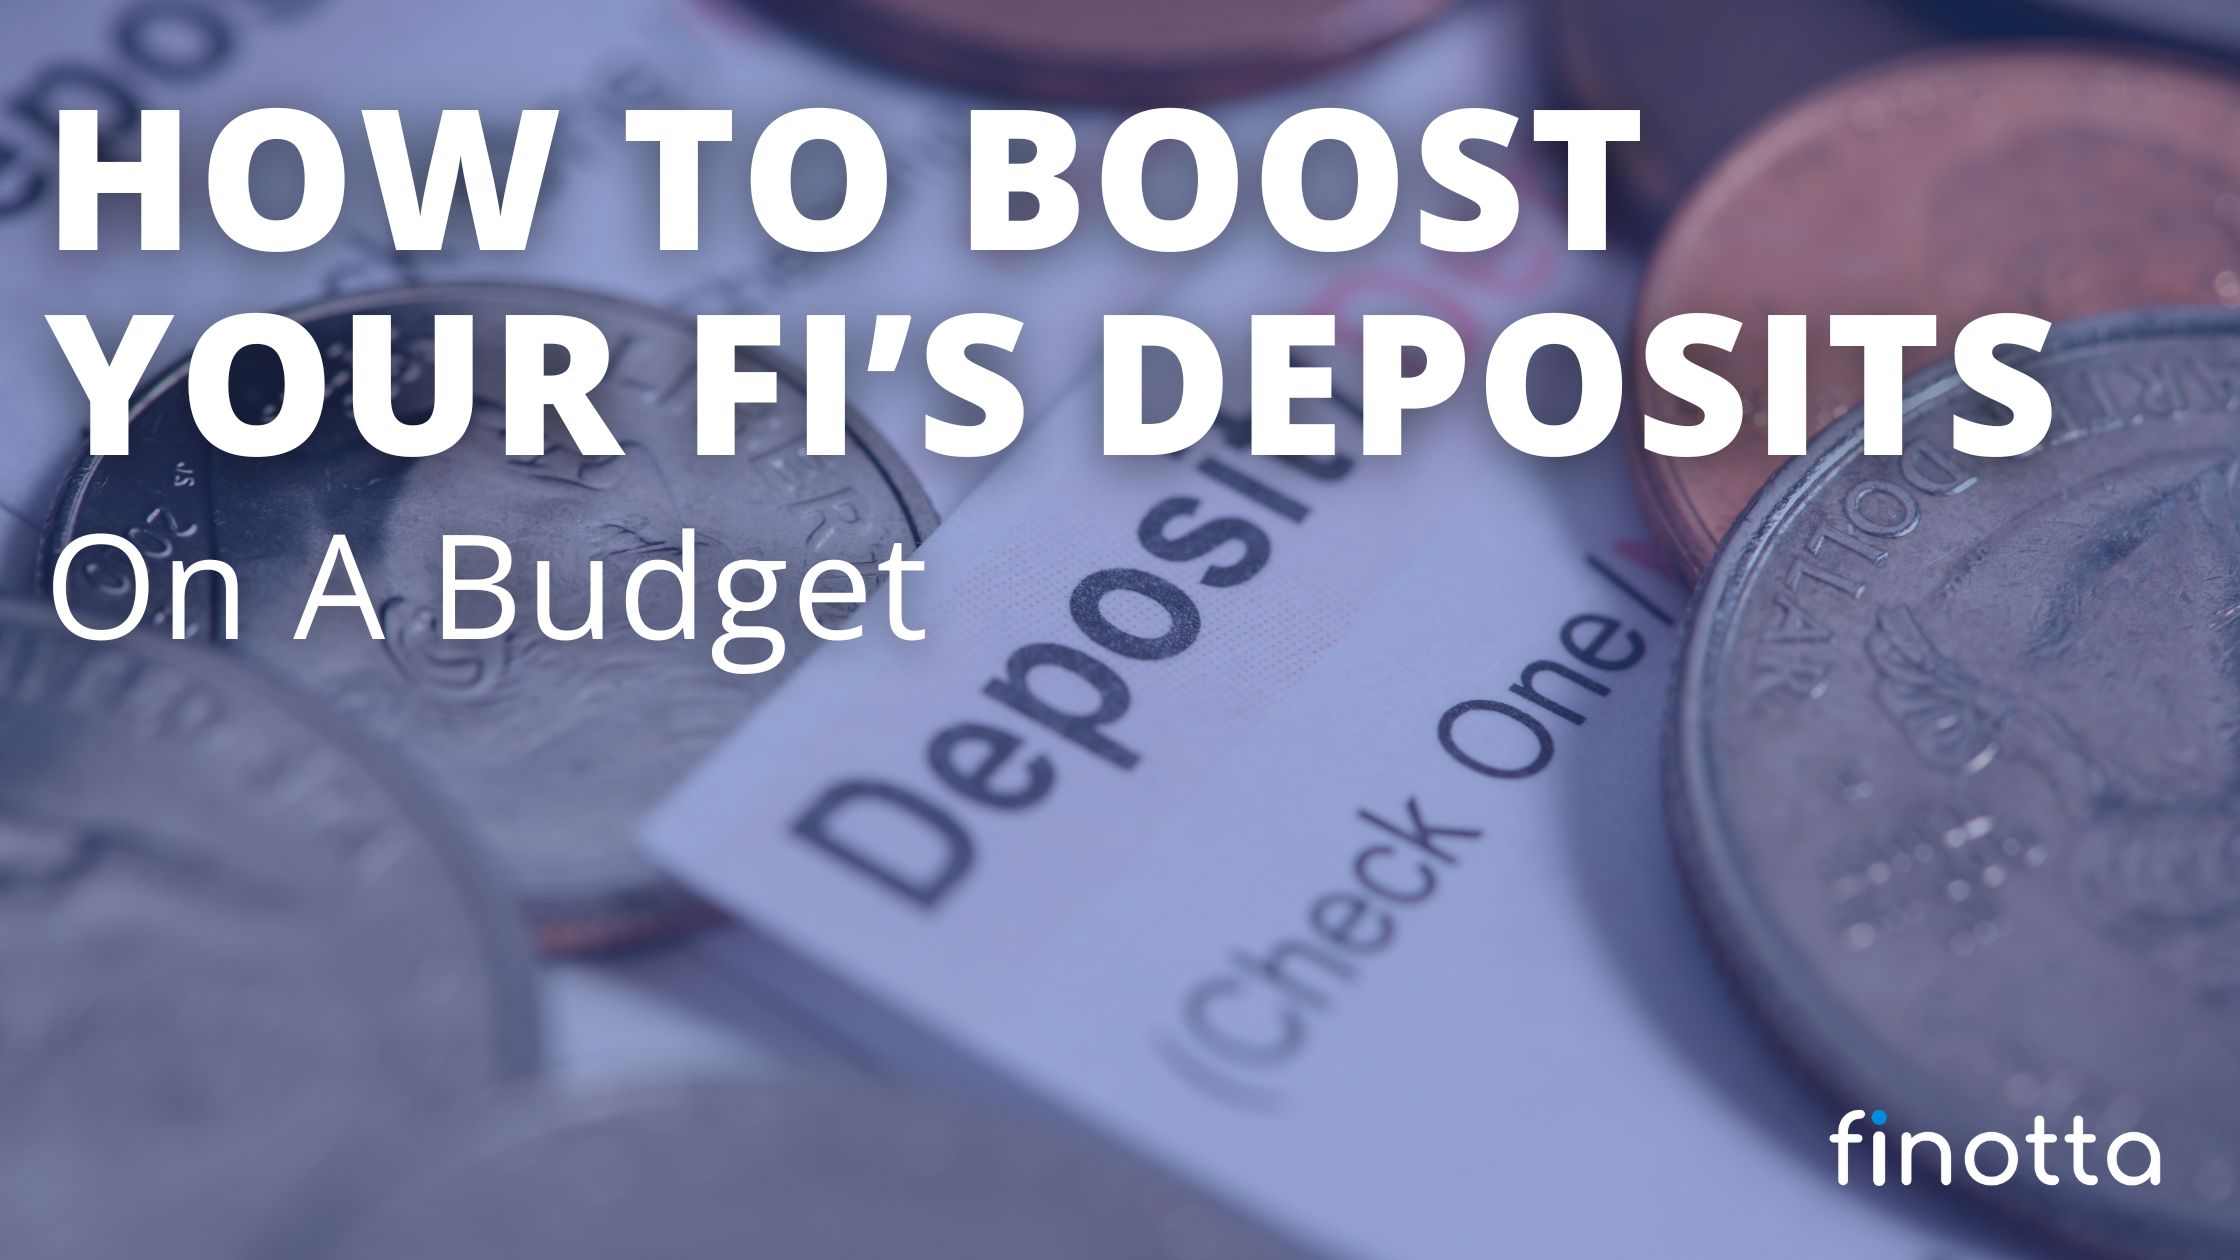 How to Boost Your FI's Deposits on a Budget